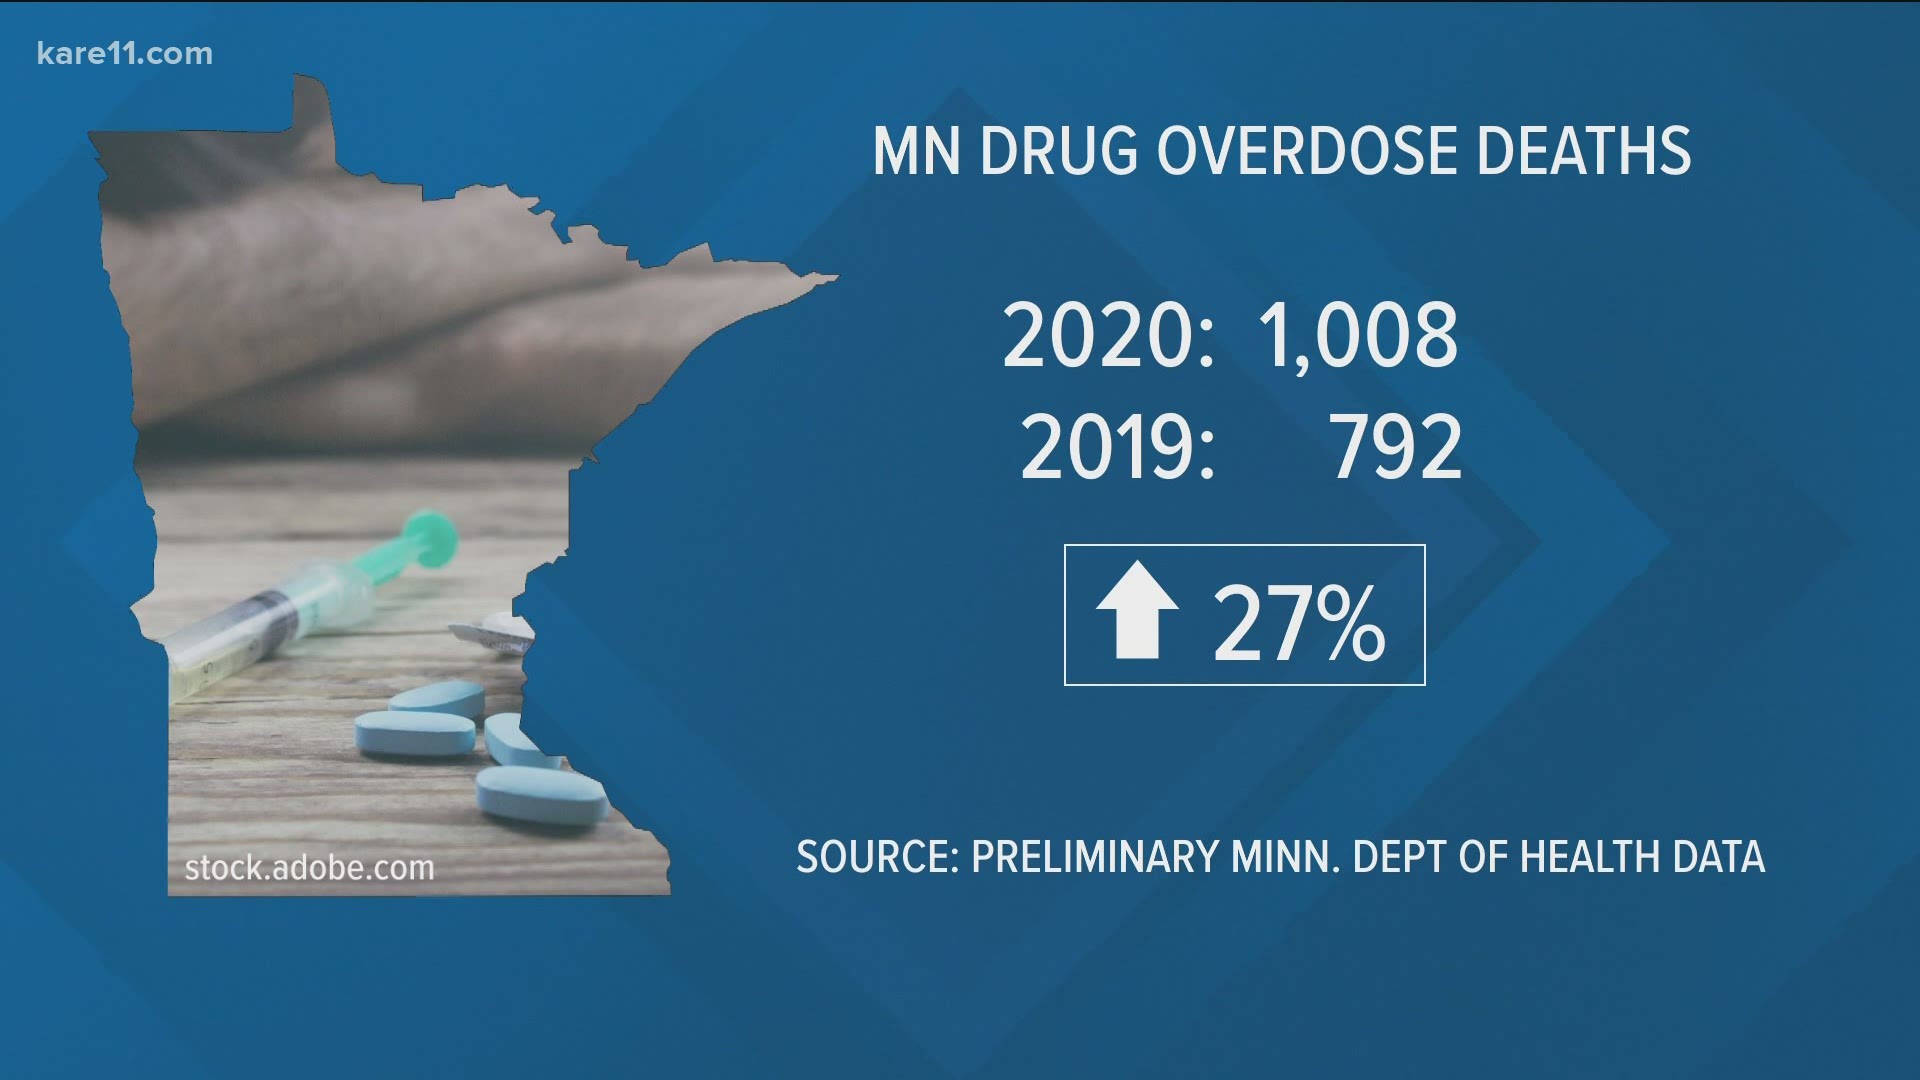 MDH reports a 27% rise in drug overdoses from 2019 to 2020, based on preliminary data. Synthetic opioids, including fentanyl, were a leading cause in the surge.